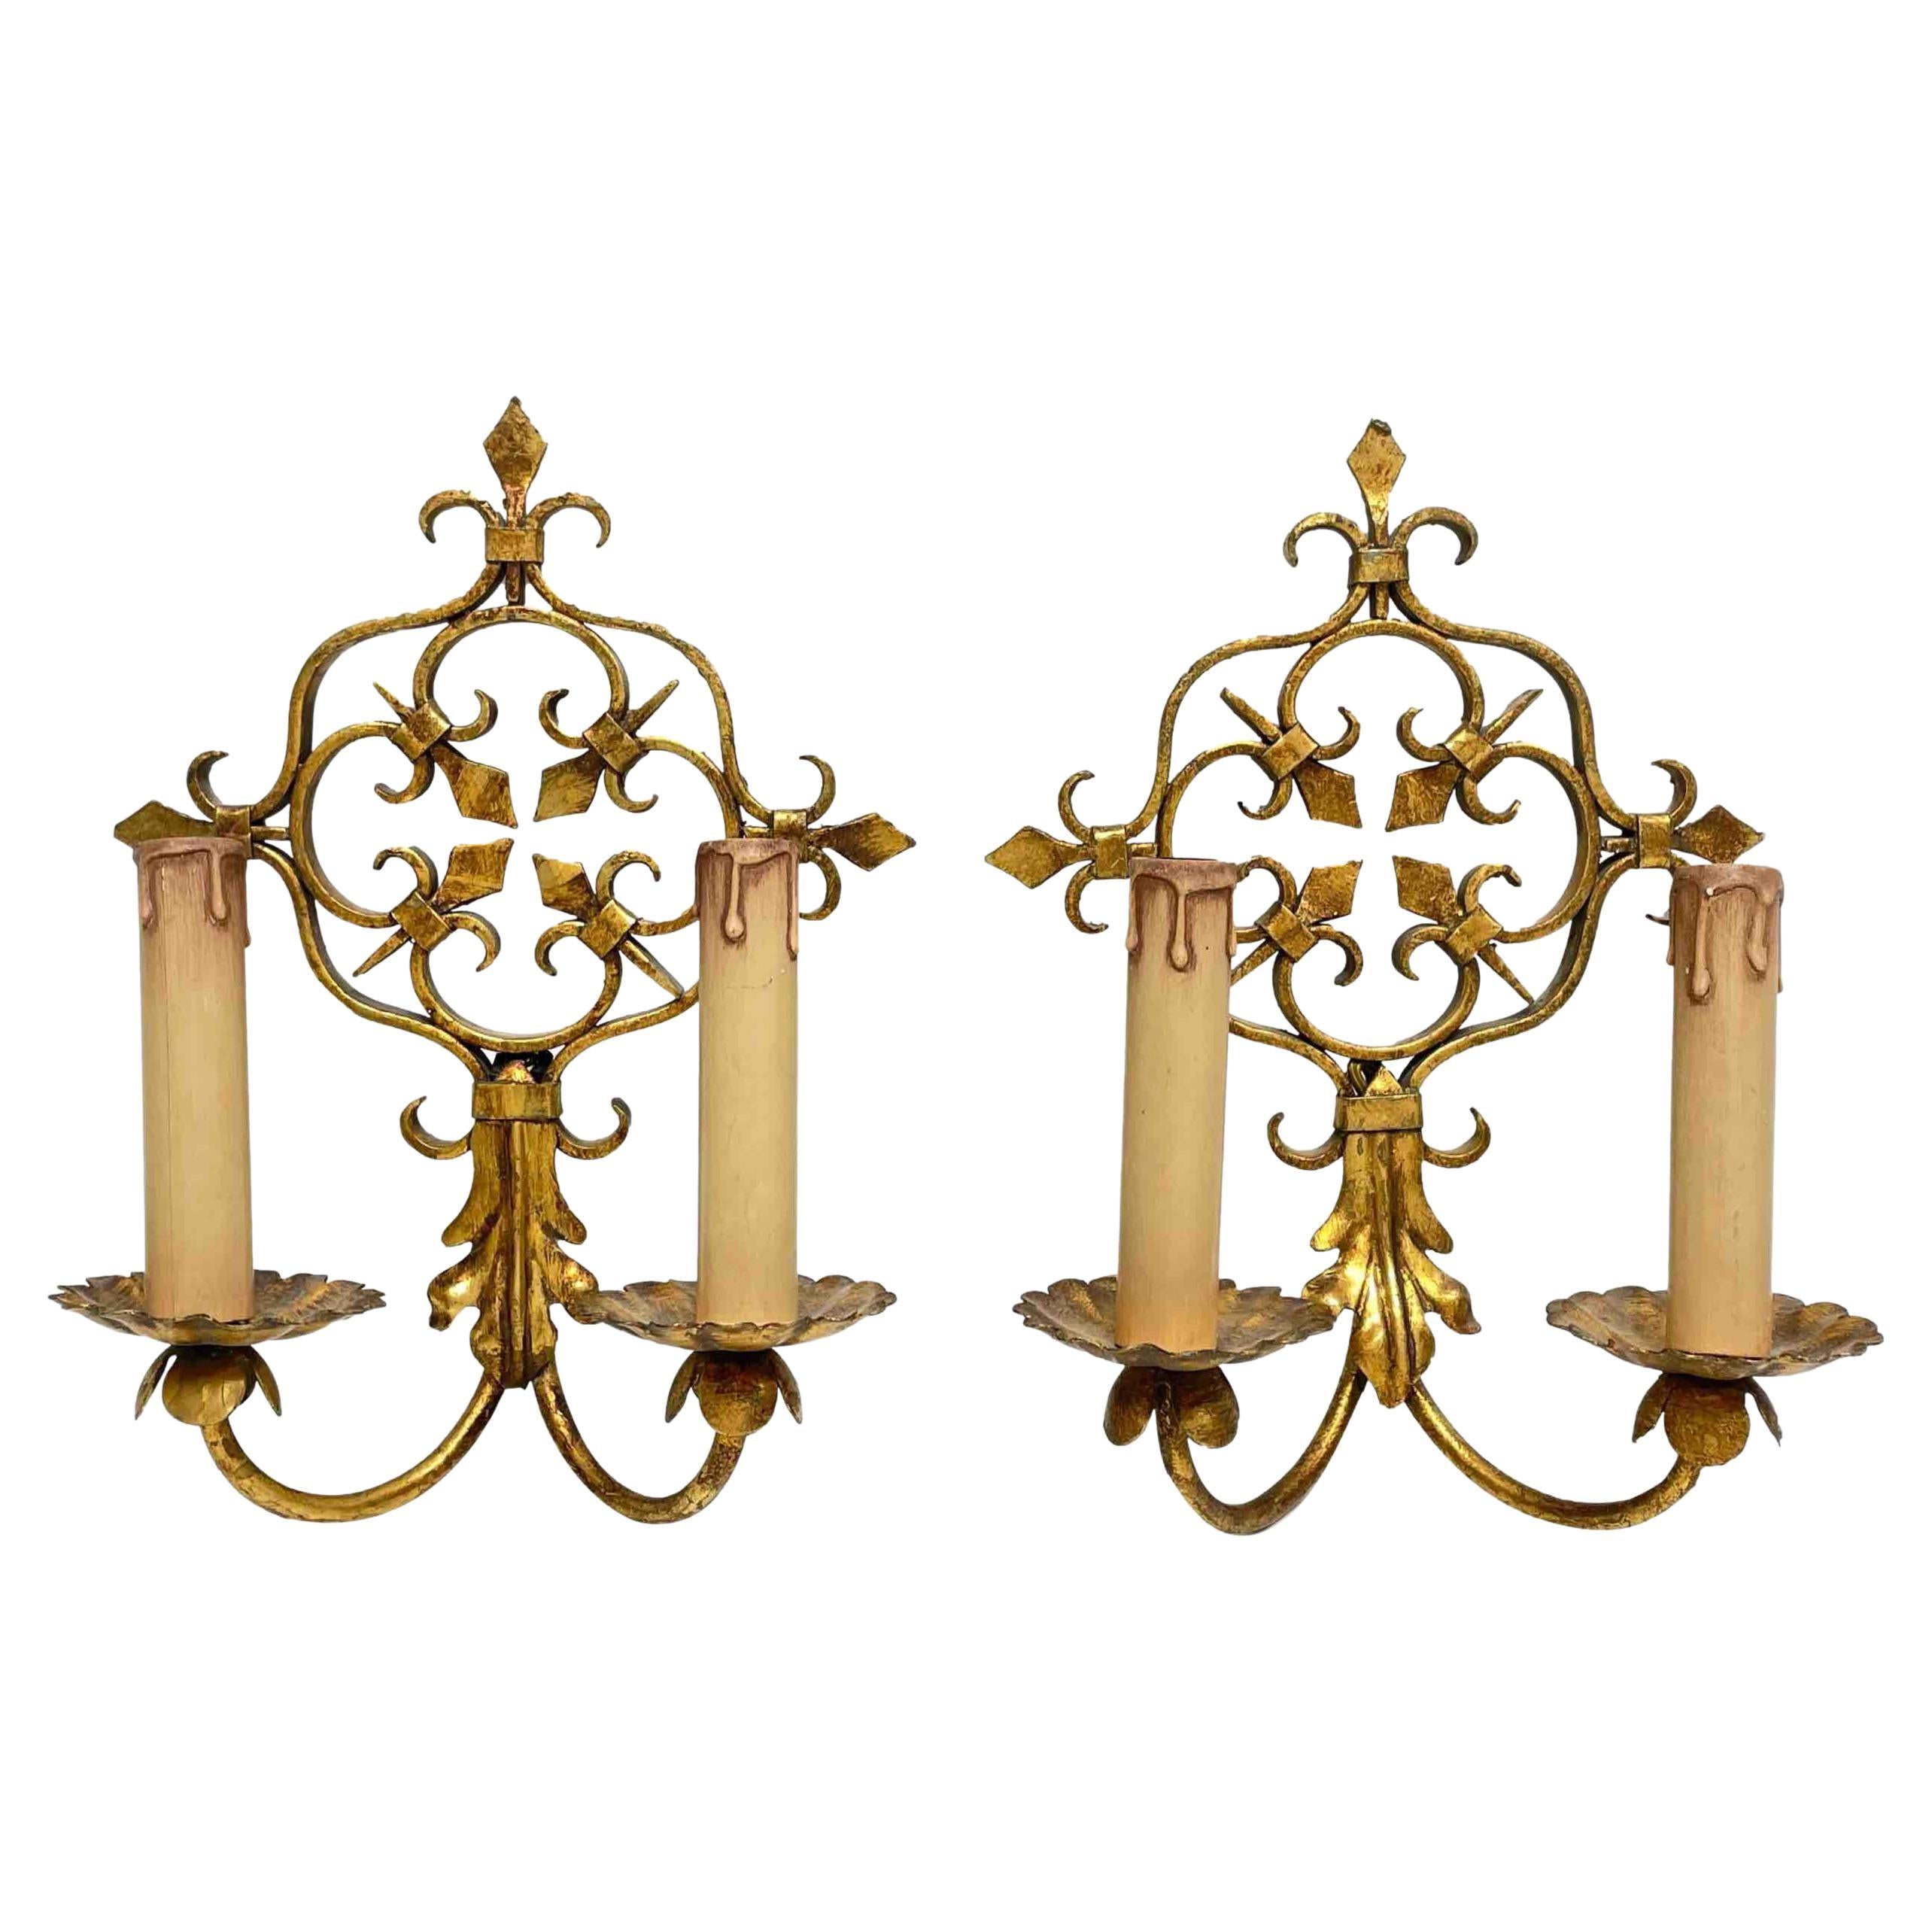 Pair of Gilt Metal Tole Toleware Sconces by Banci Firenze, Italy, 1960s